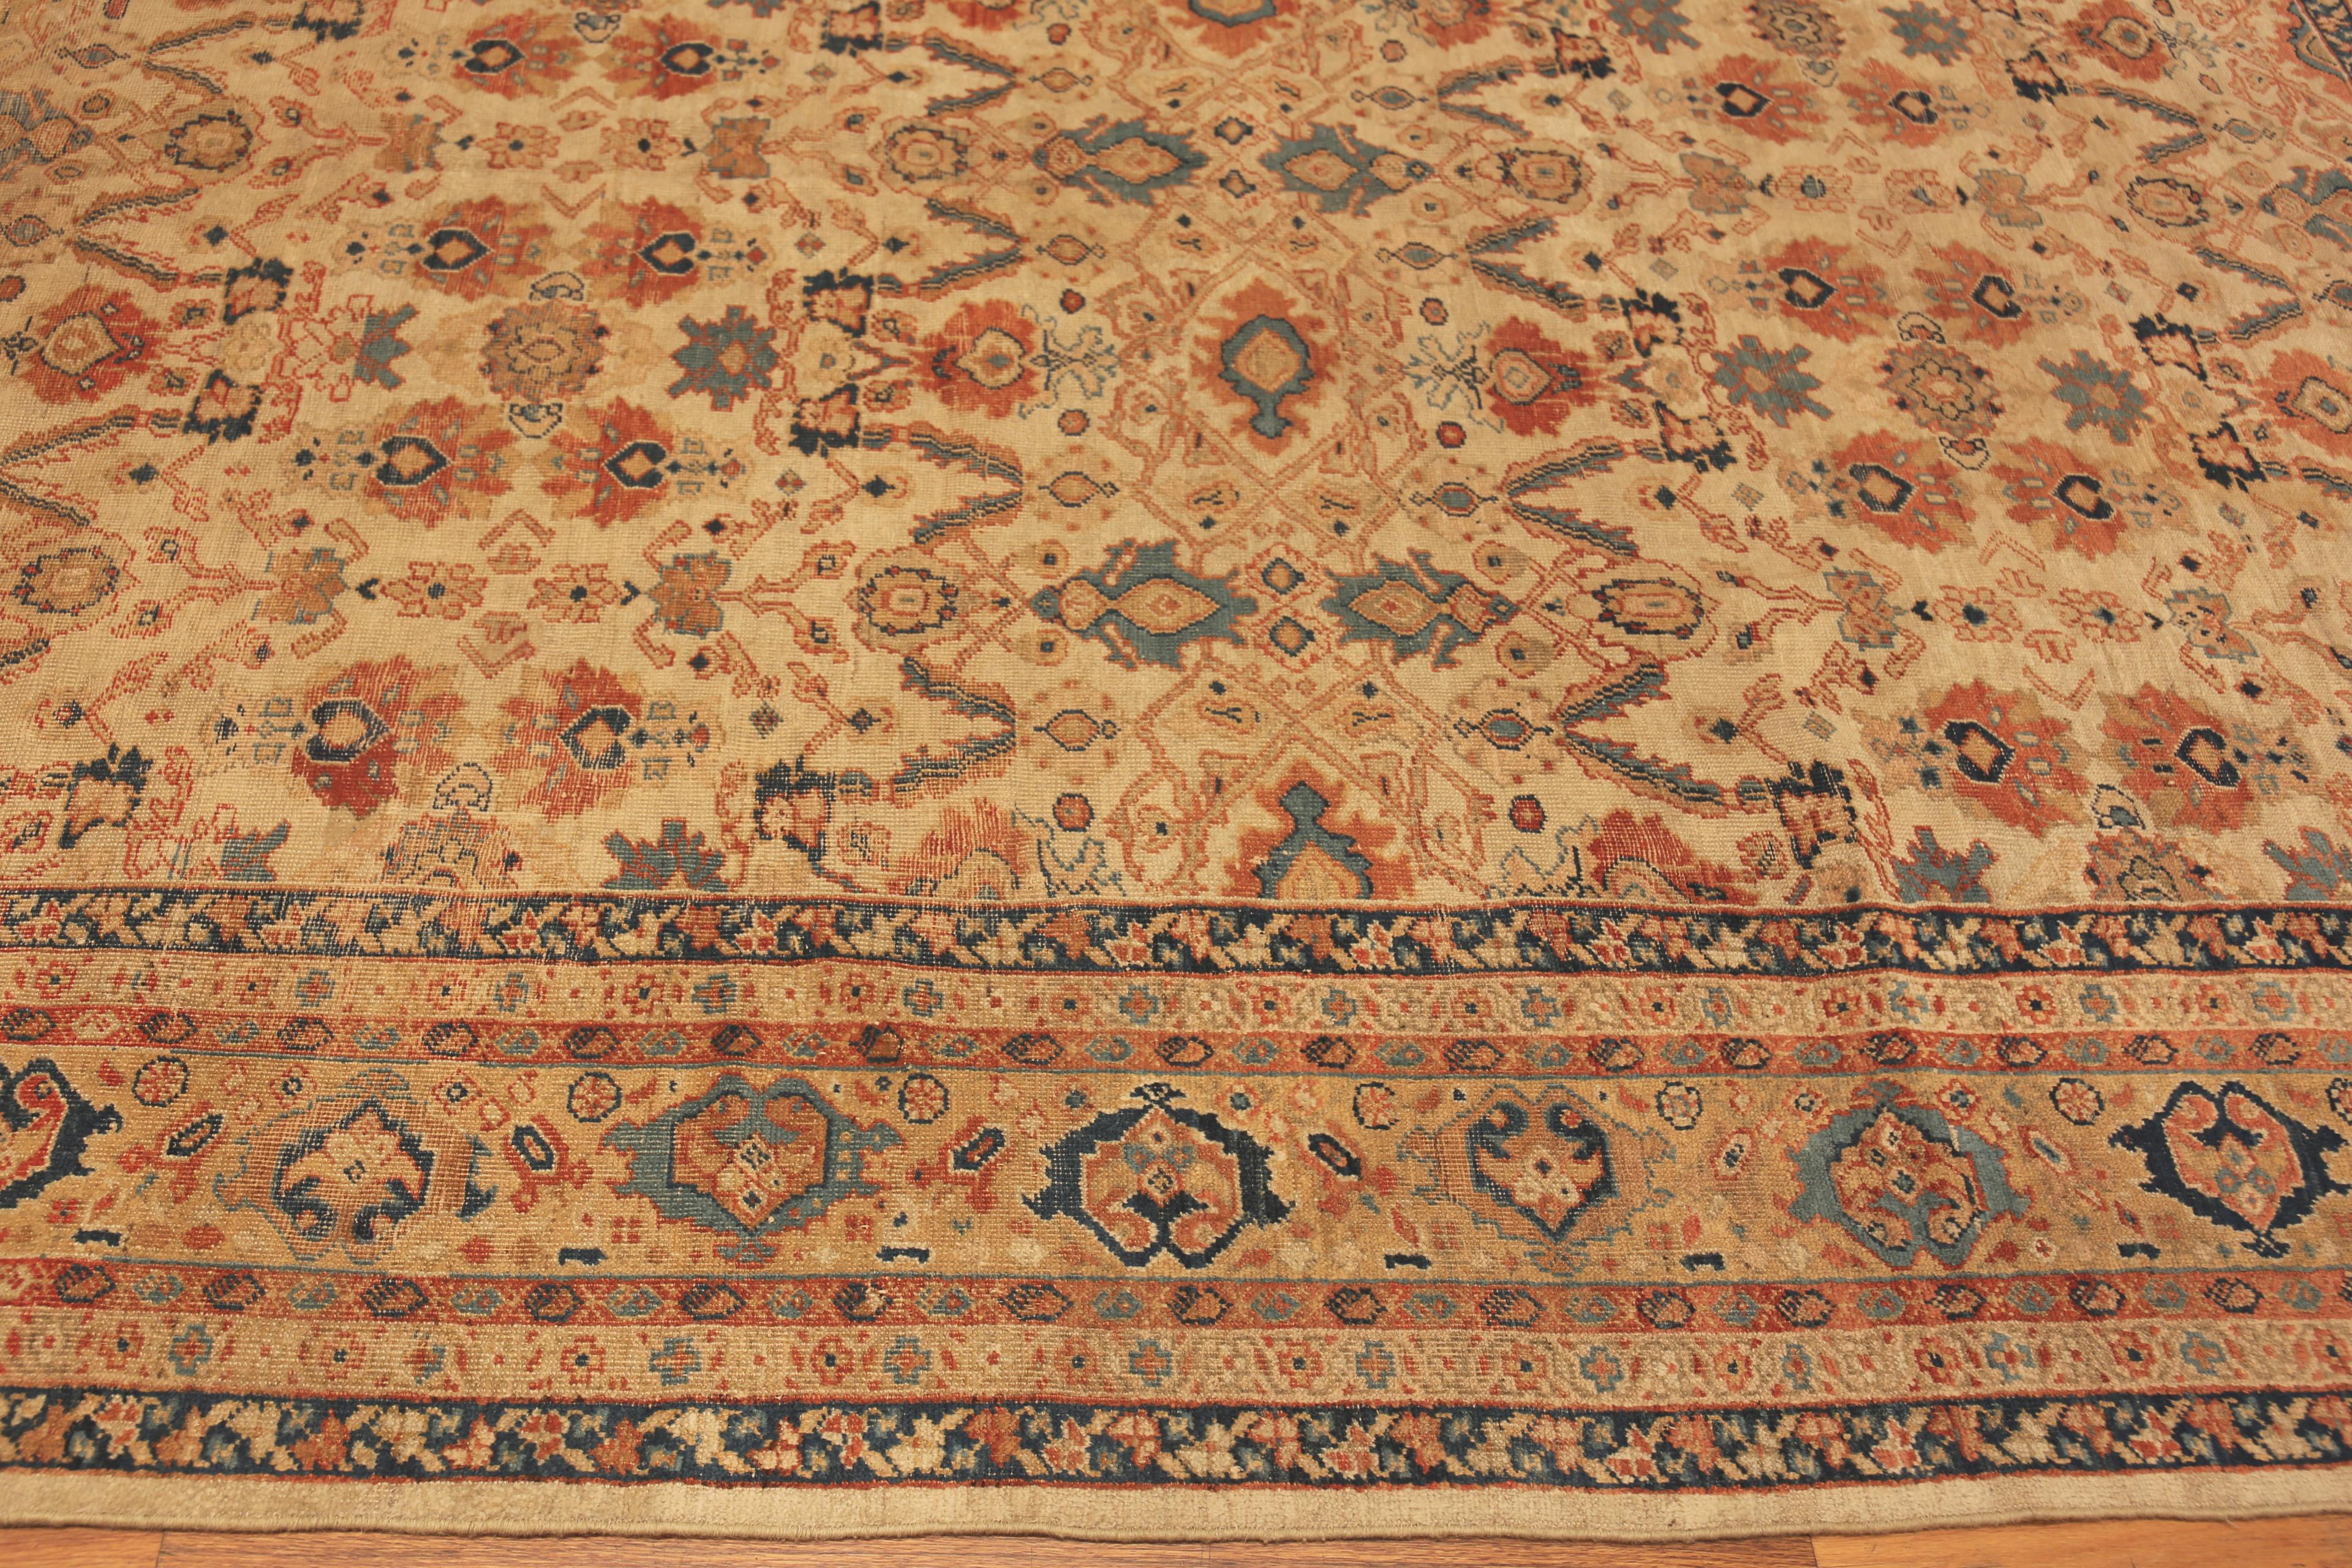 Ancien tapis persan Mahal, Pays d'origine : Perse, Circa date 1900. Taille : 8 ft 9 in x 12 ft 6 in (2,67 m x 3,81 m)

